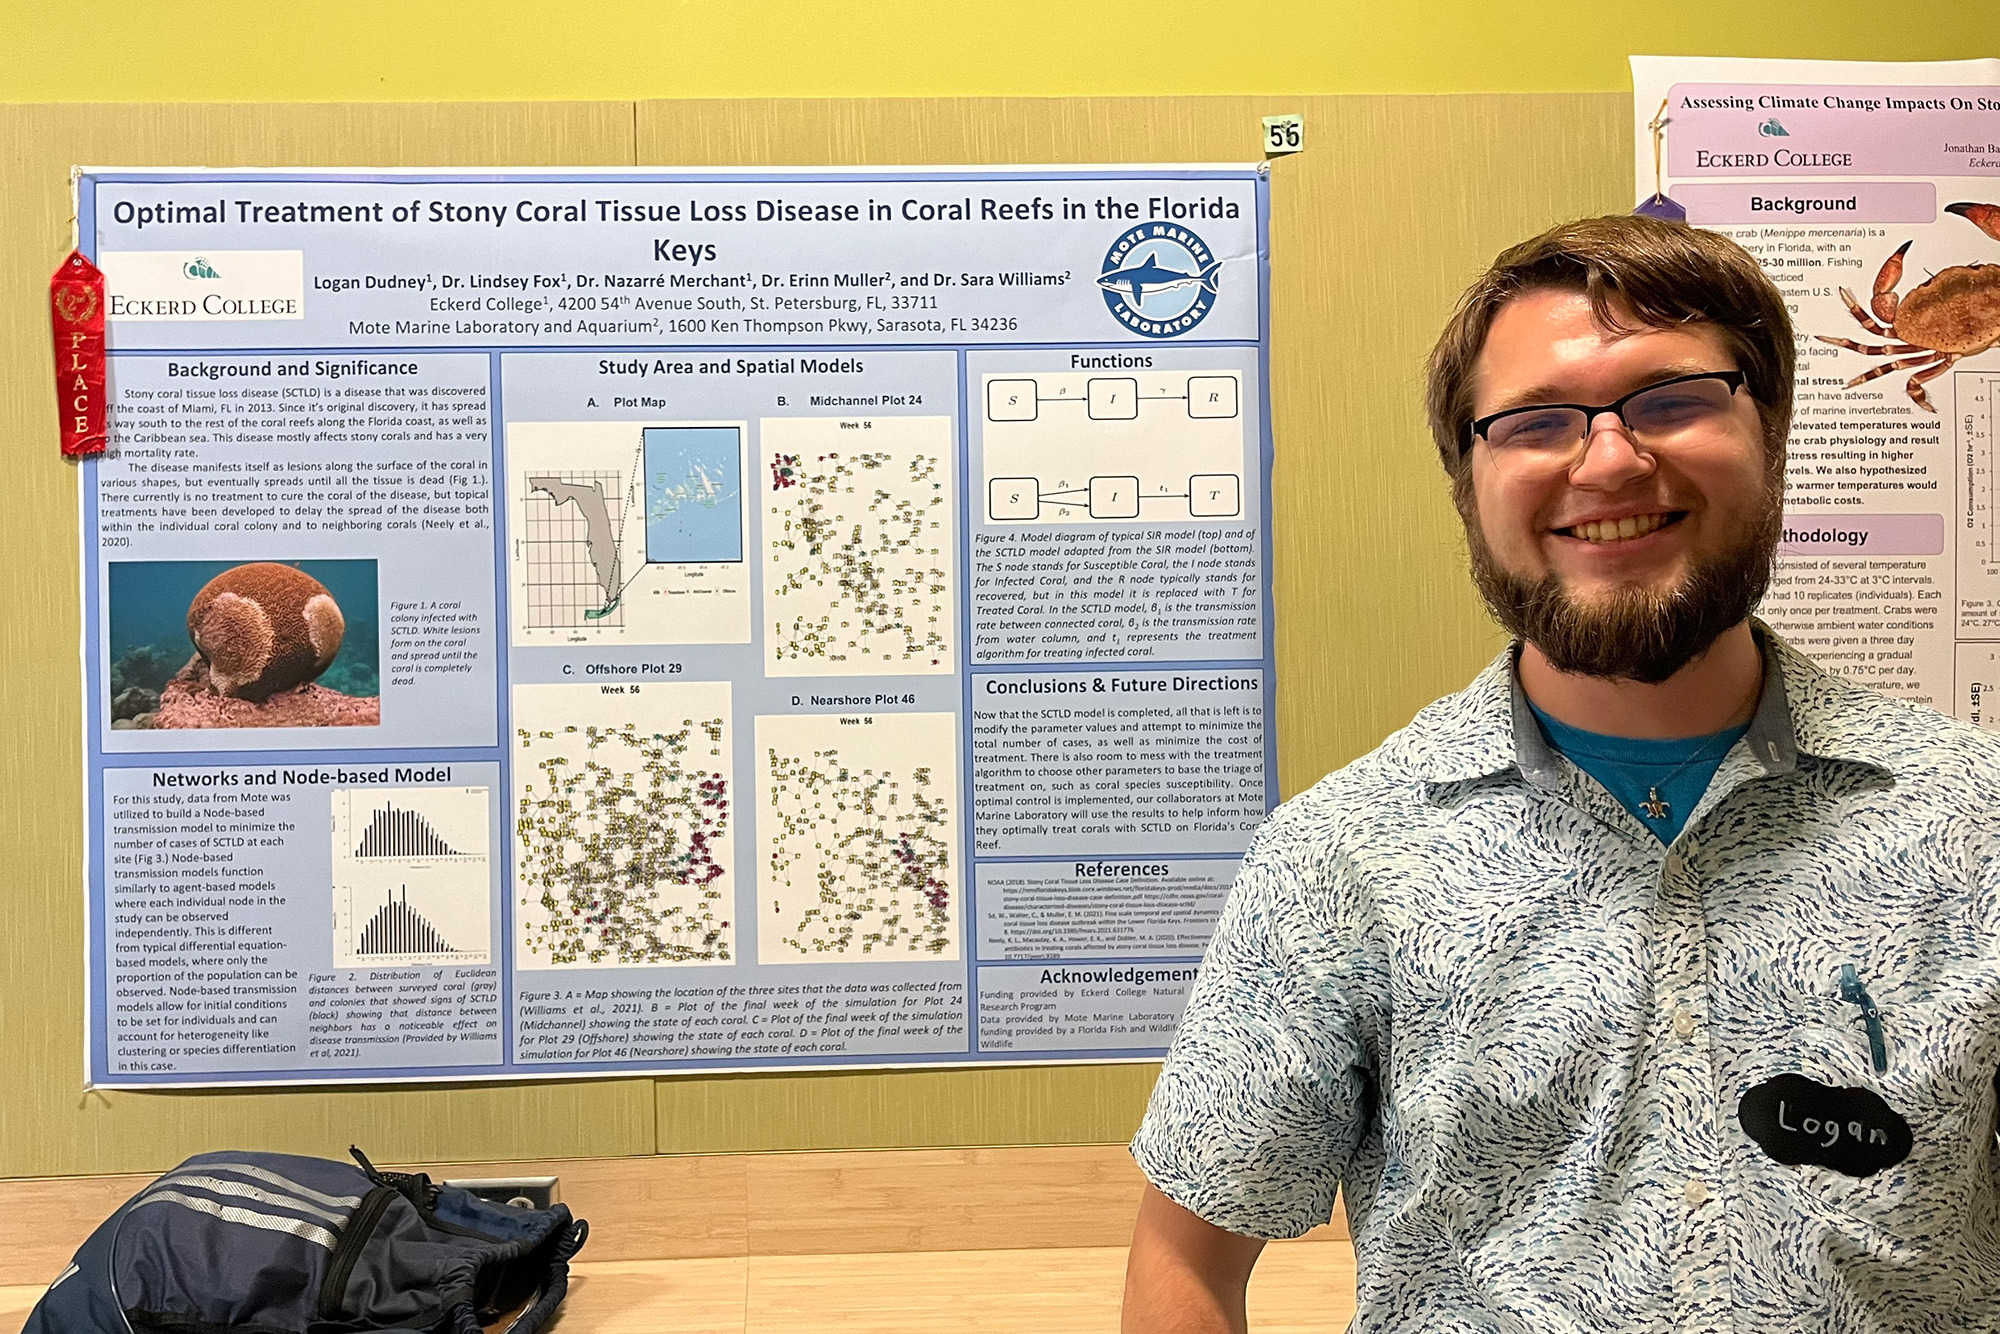 Young man with beard stands in front of scientific poster